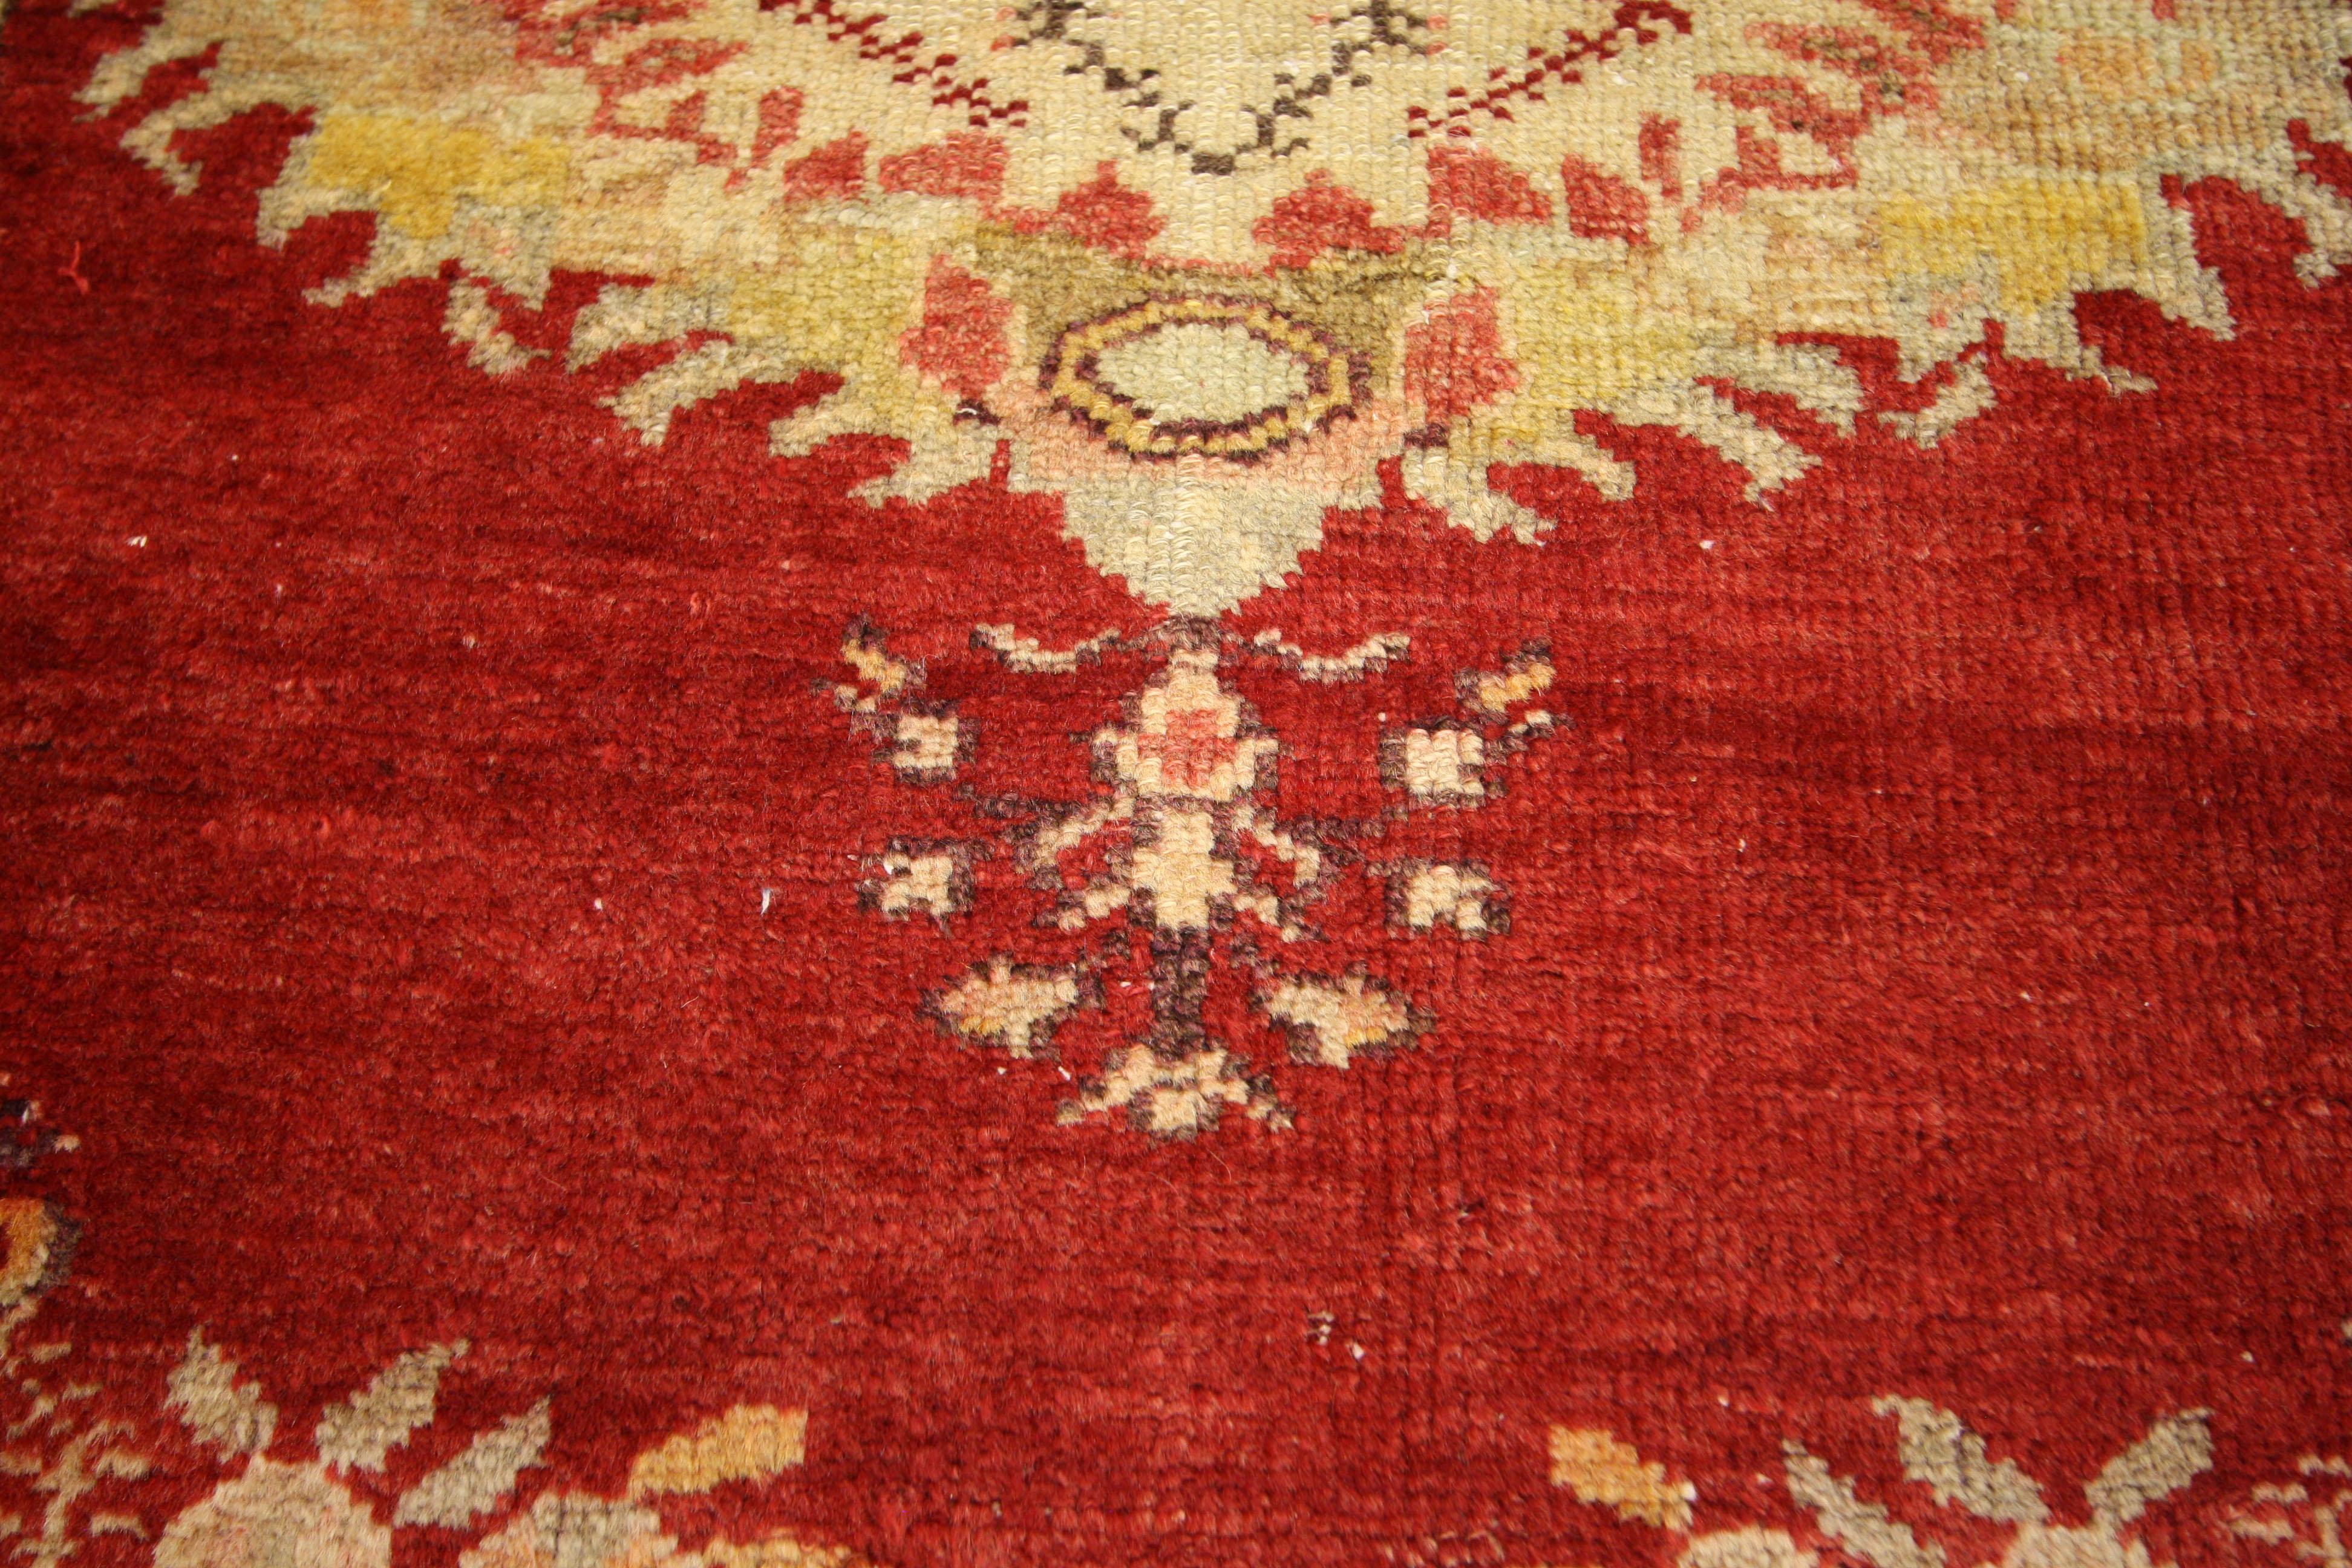 52329, vintage Turkish Oushak rug with French Rococo style, Kitchen, foyer or entry rug. French Rococo Romanticism meets timeless Anatolian tradition in this Classic style vintage Turkish Oushak rug. Set with an elaborate medallion against an